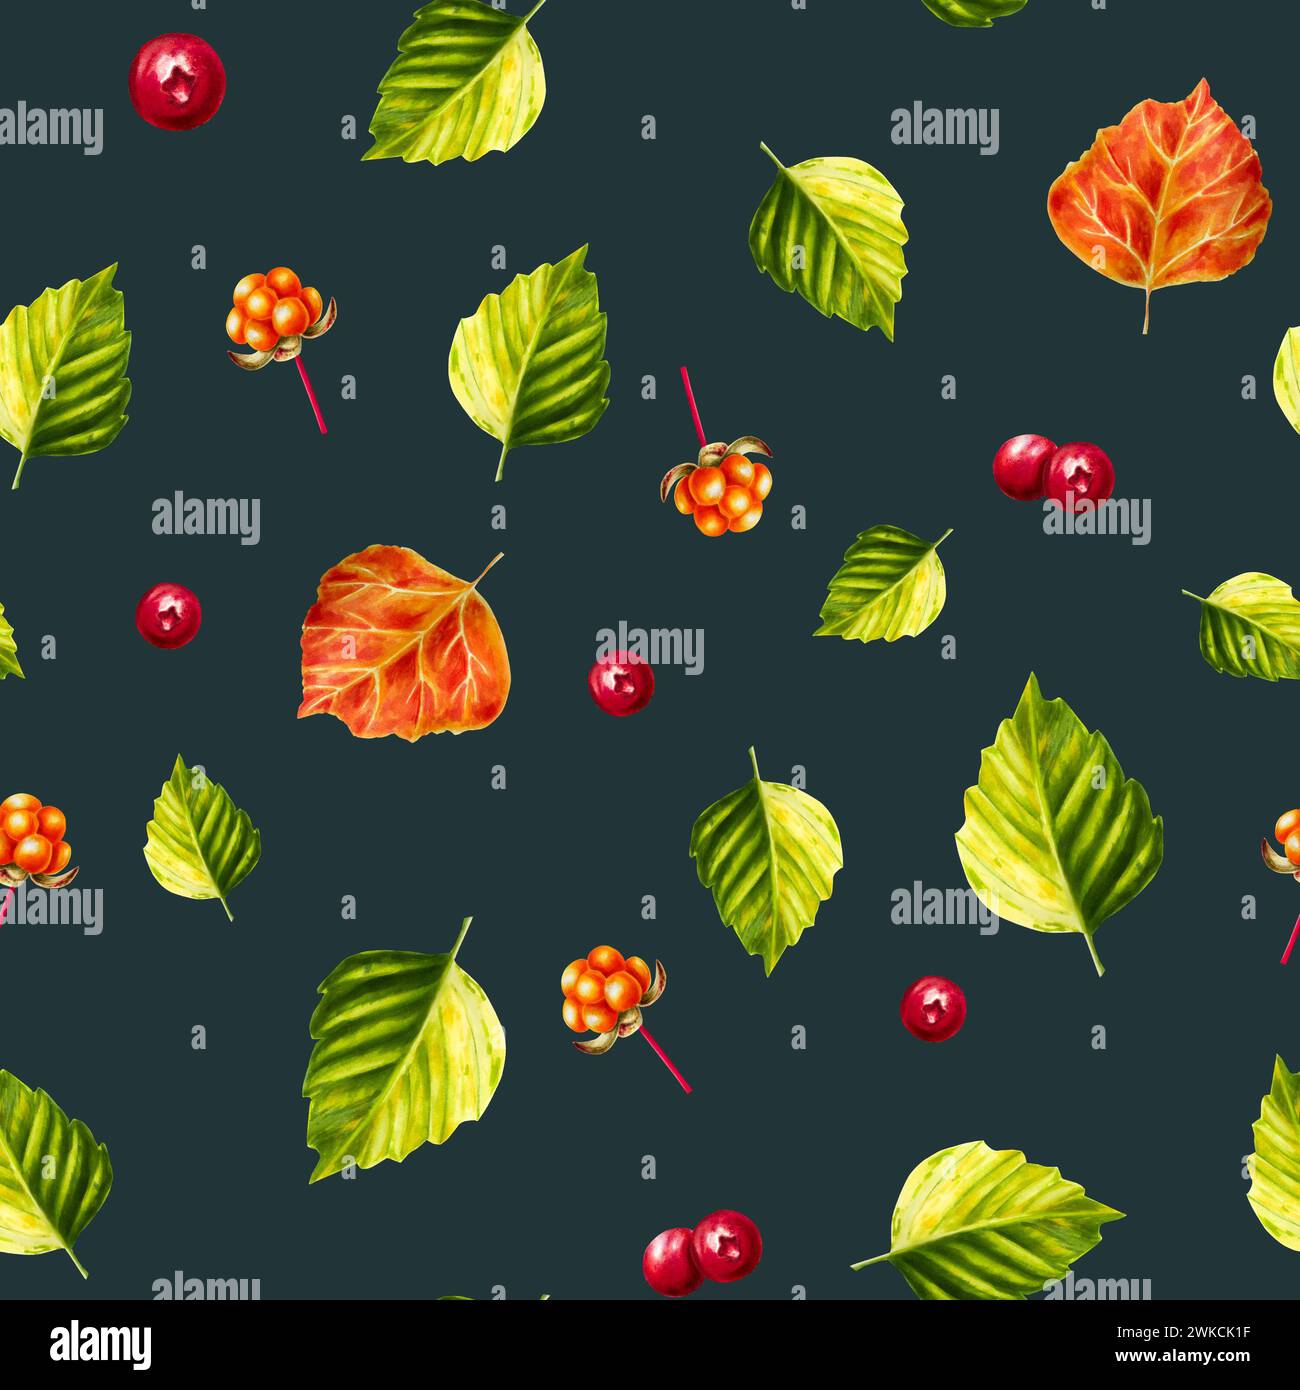 Watercolor seamless pattern with forest berries lingonberry, cranberry and cowberry, cloudberry illlustration. Juicy red berries and green leaf isolat Stock Photo